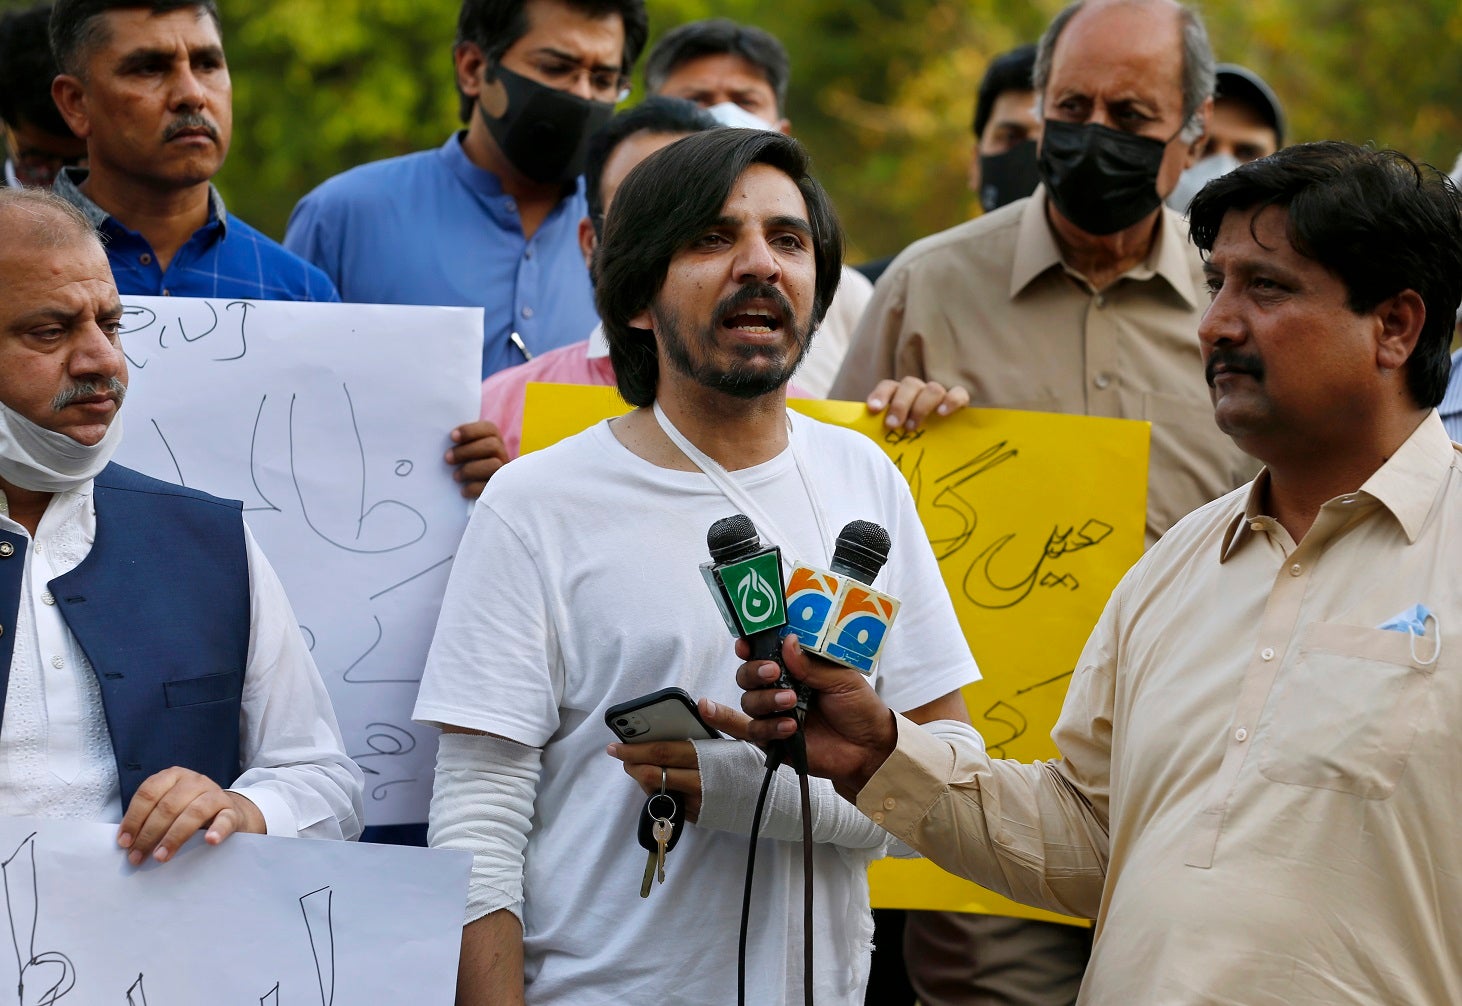  Pakistani journalist Asad Ali Toor, center, speaks during a demonstration to condemn the attack on journalists, in Islamabad, Pakistan.